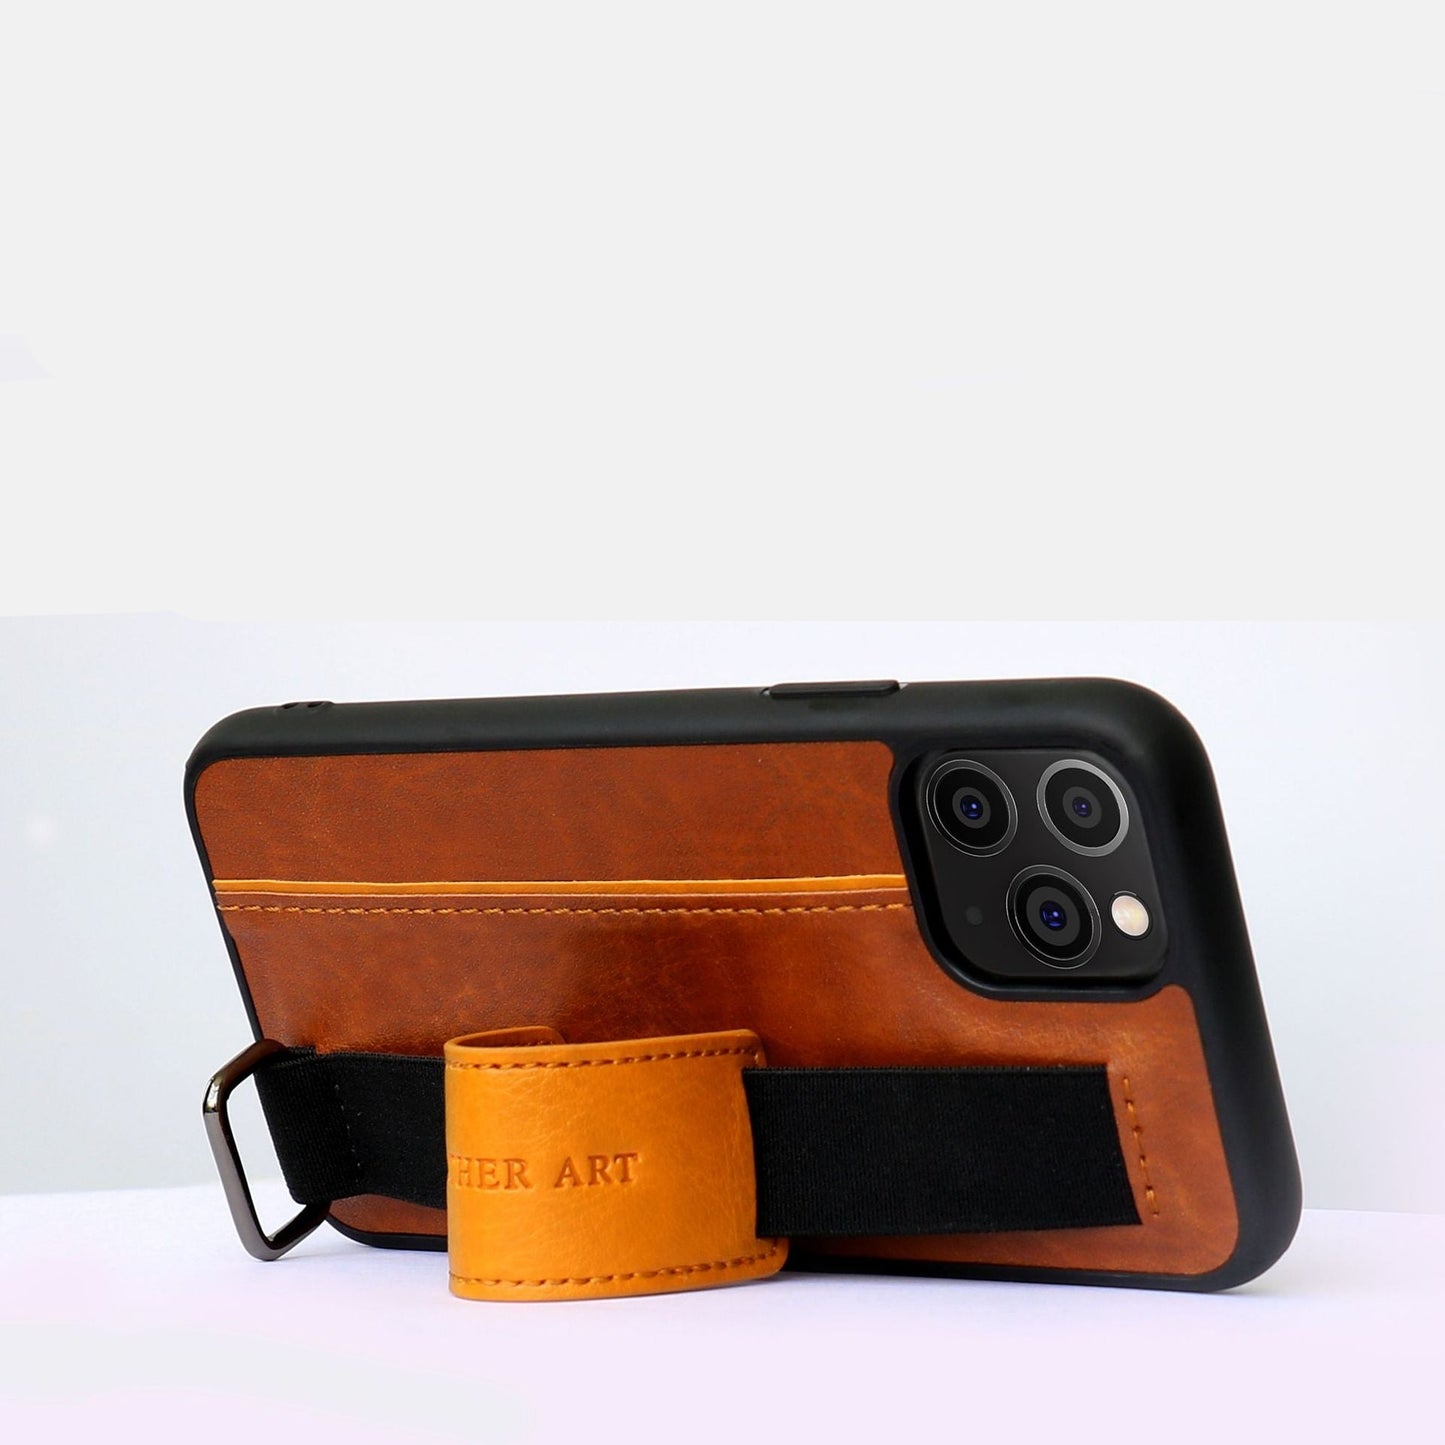 Protective Leather Case with Wrist Strap for iPhone